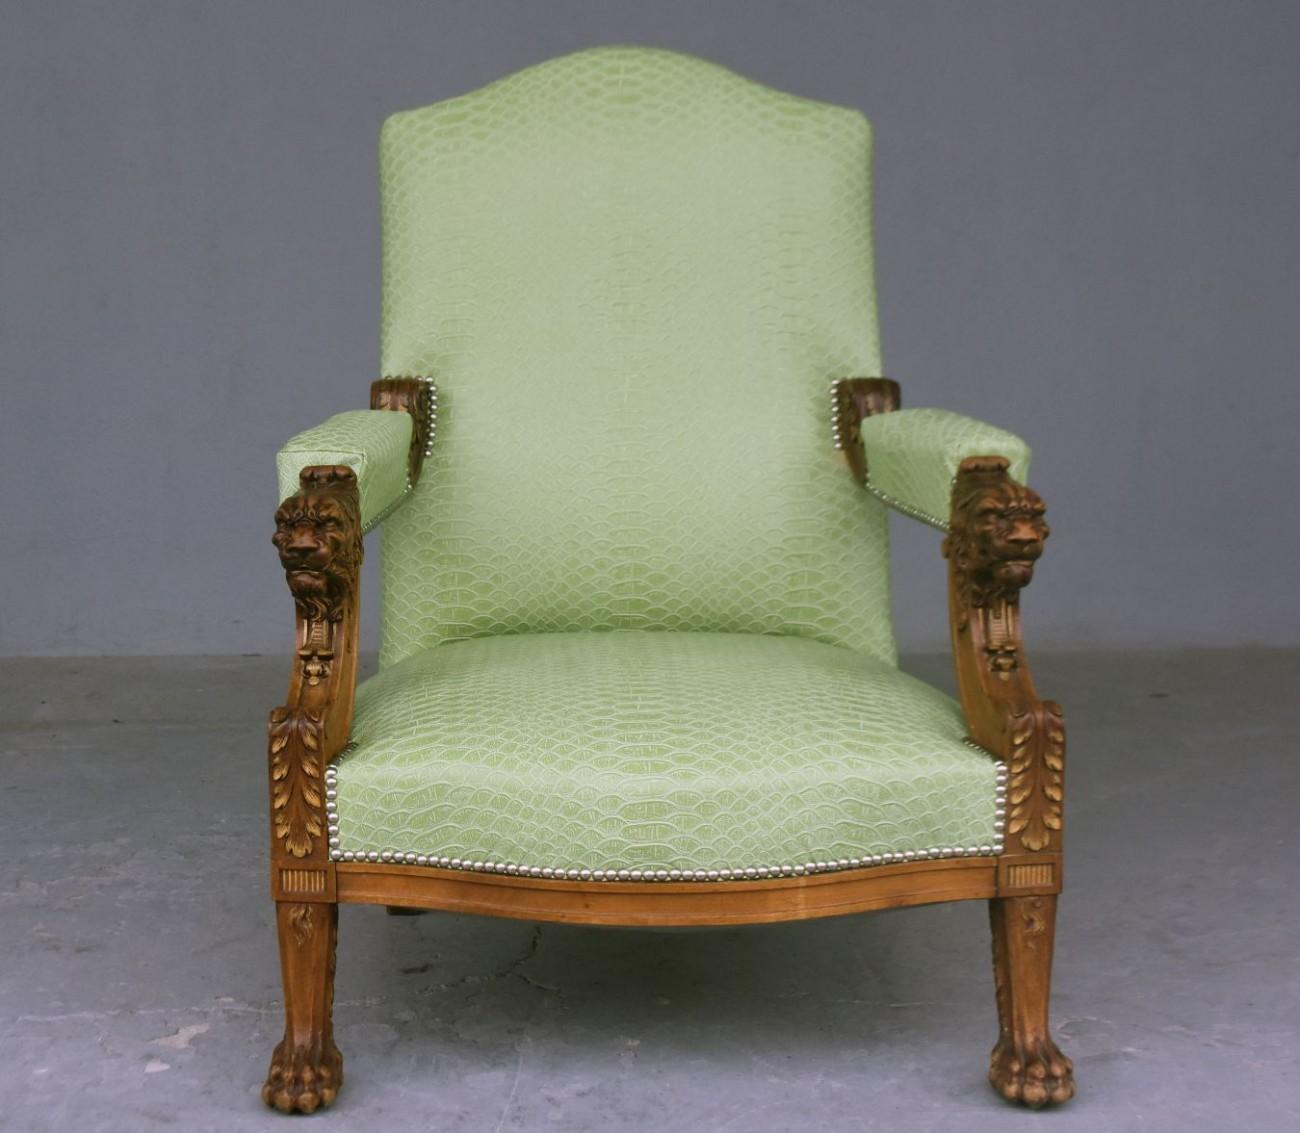 Pair of walnut armchairs with lion claw feet late 19th century. Decoration with golden foliage. Recently covered with imitation leather imitation tortoiseshell lizard color Pistachio tissue.